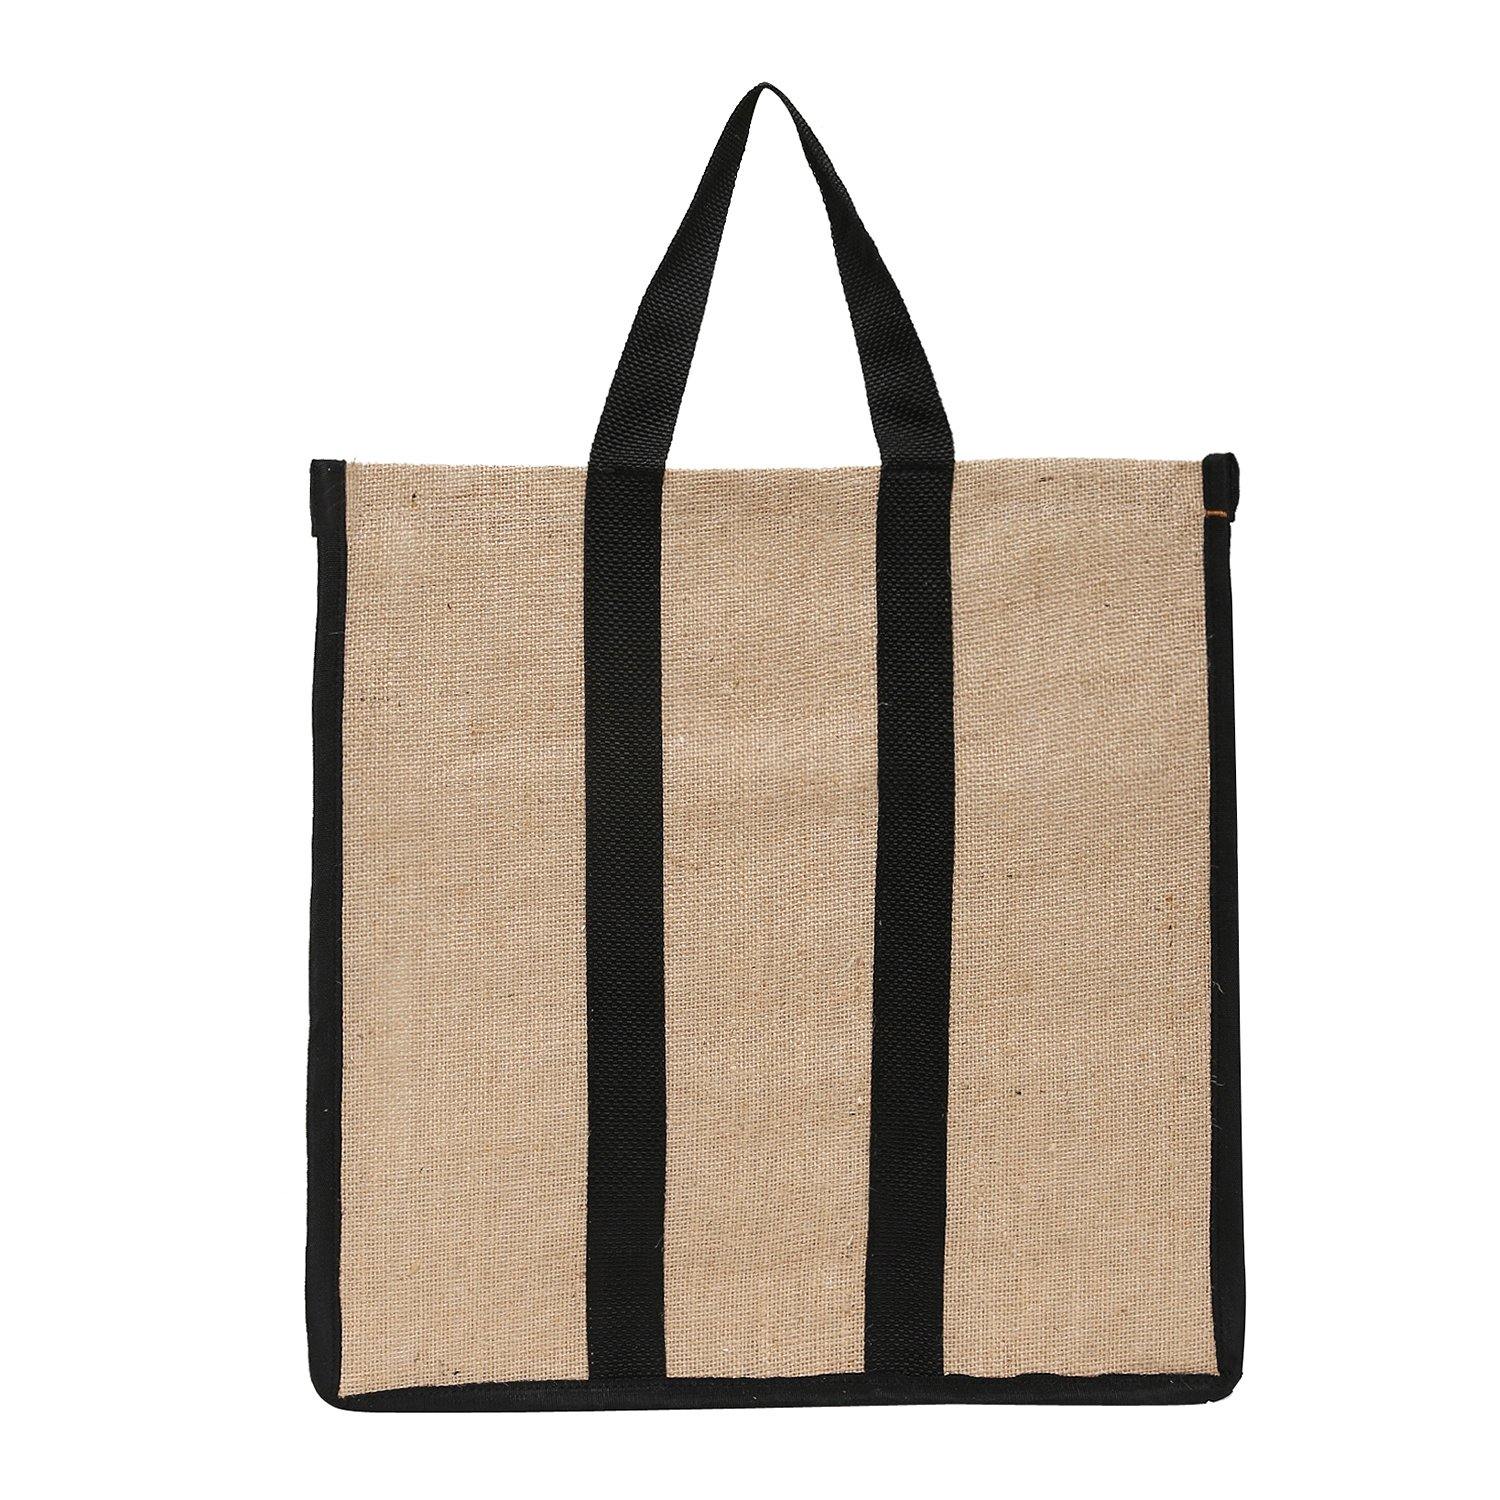 DOUBLE R BAGS Reusable Laminated Jute Grocery Shopping Bag - Double R Bags